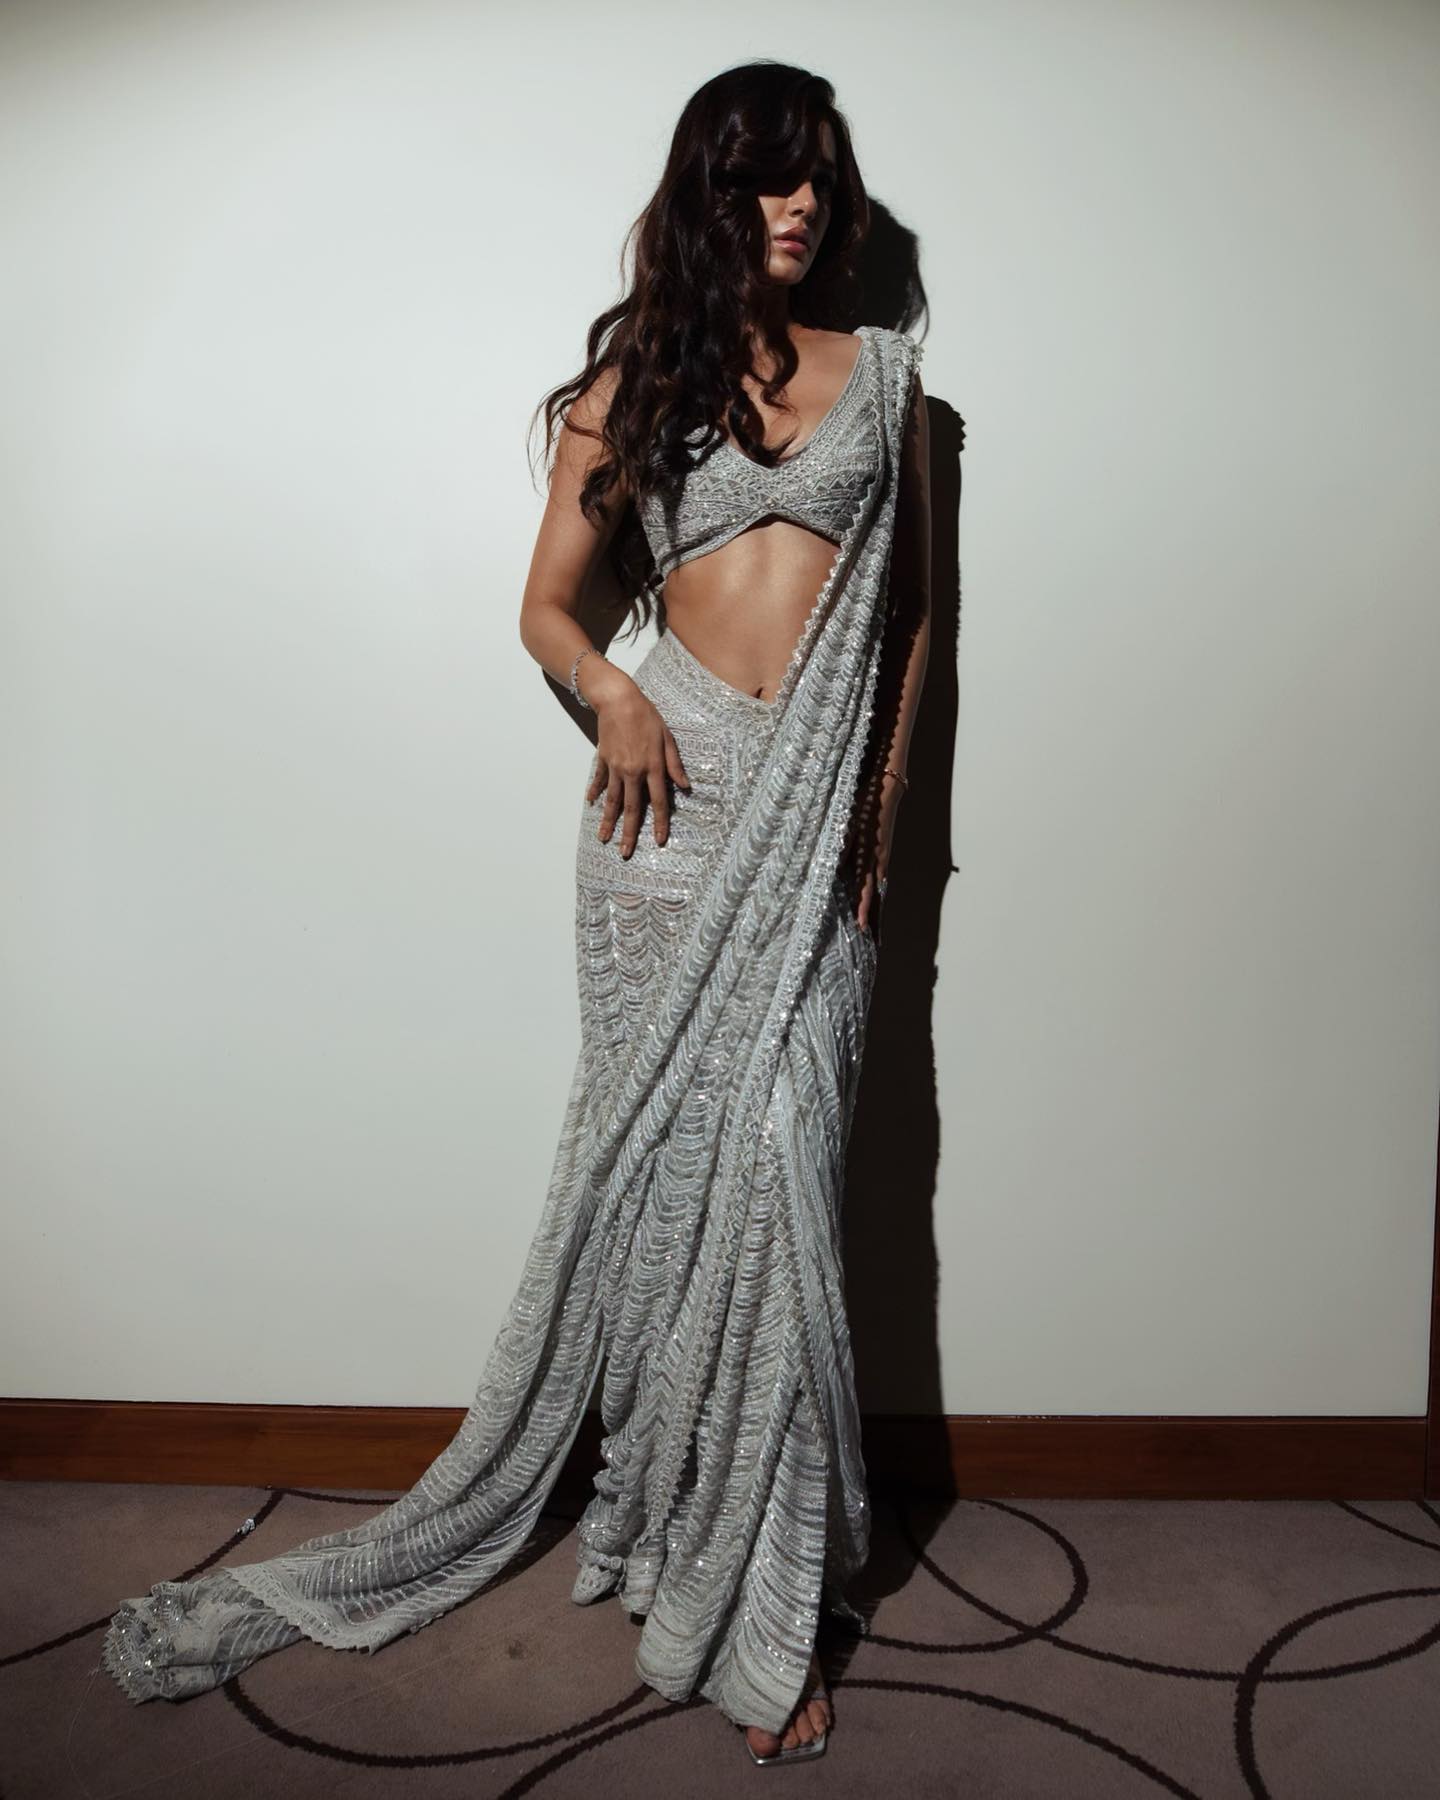 Disha Patani has managed to bedazzle all with her latest photos on Instagram. Draped in a silver-grey saree-lehenga, the actress looks sensational. Indeed, traditional attire accentuates her beauty like no other.